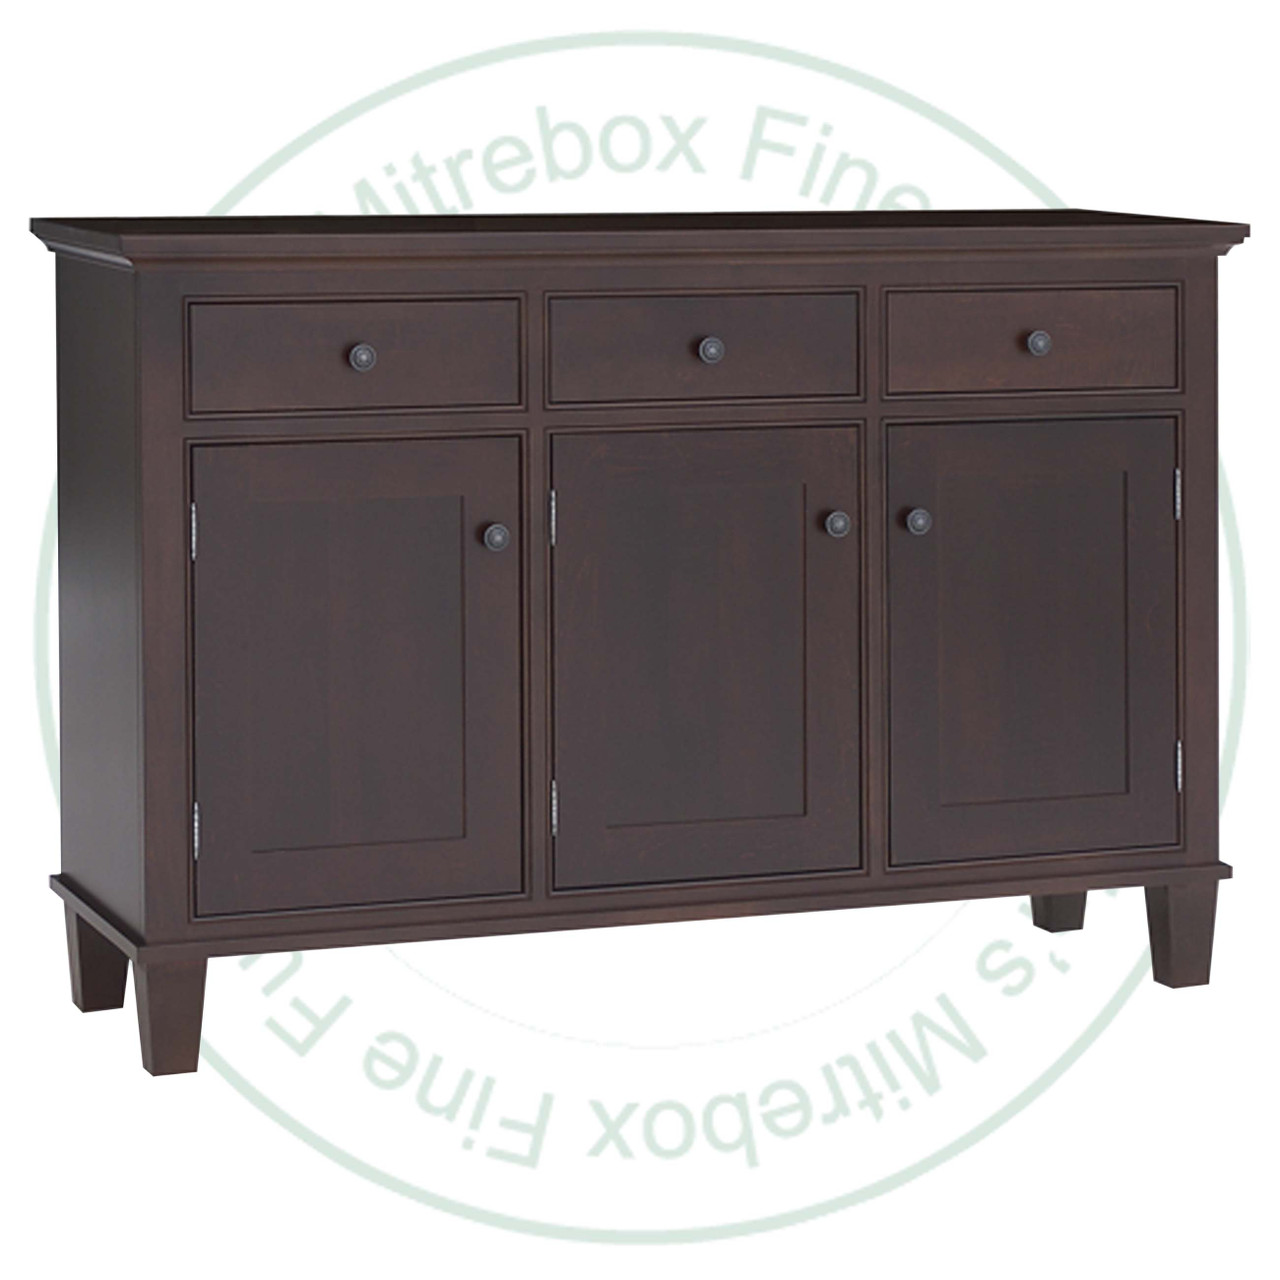 Oak Georgetown Sideboard 19.5'' Deep x 61.5'' Wide x 42'' High With 3 Wood Doors And 3 Drawers